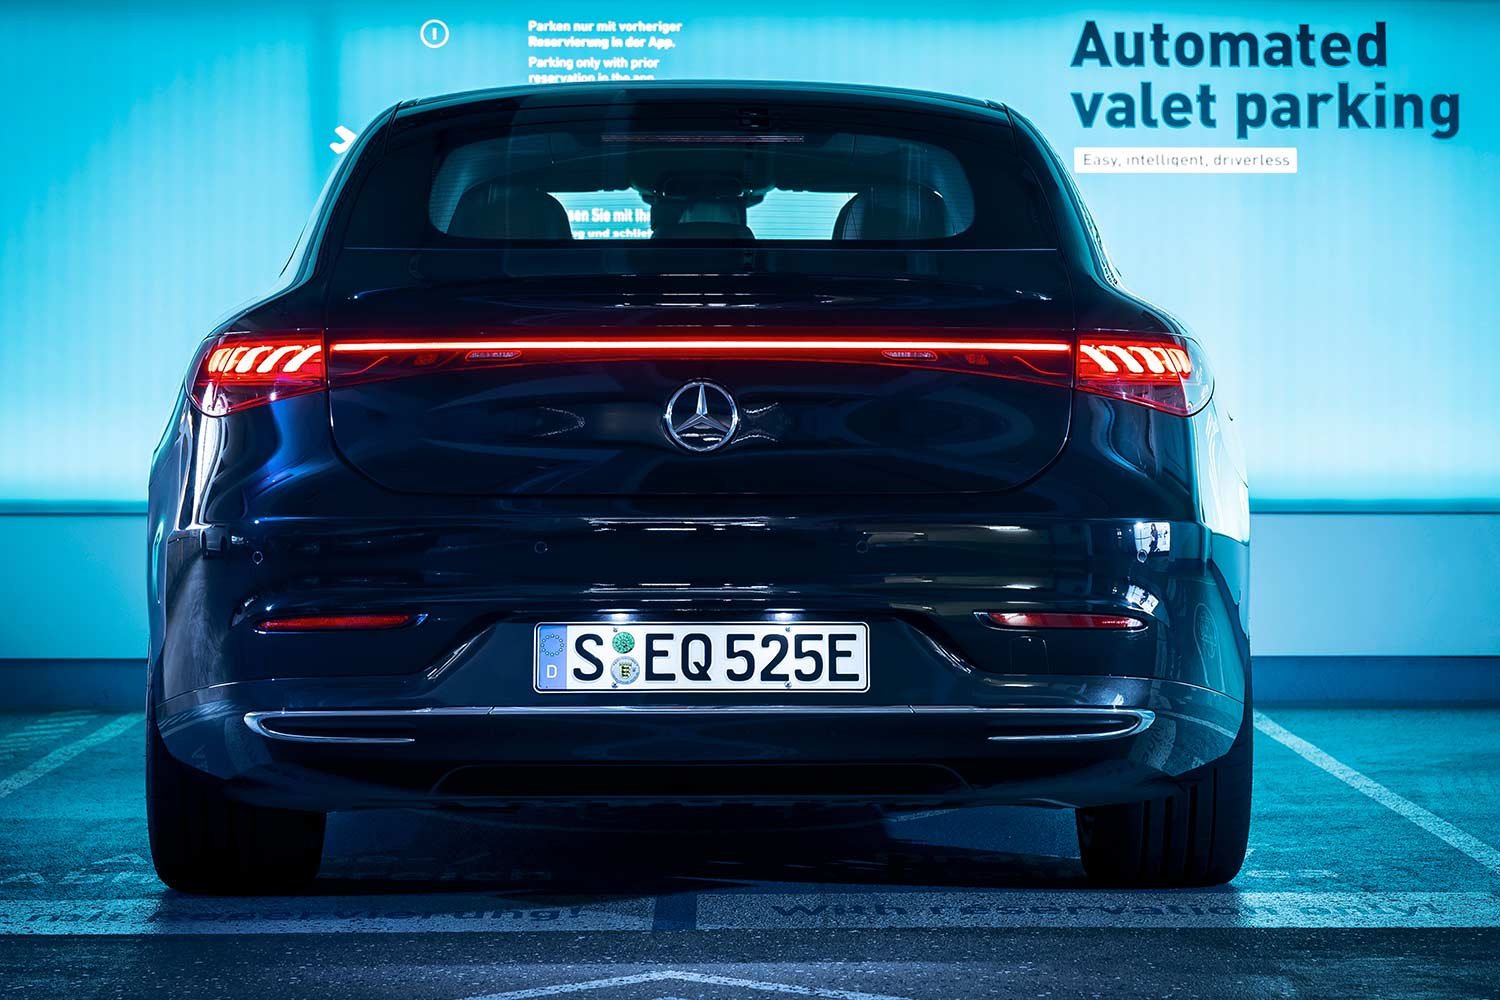 Mercedes Benz and Bosch driverless parking system at Germany airport